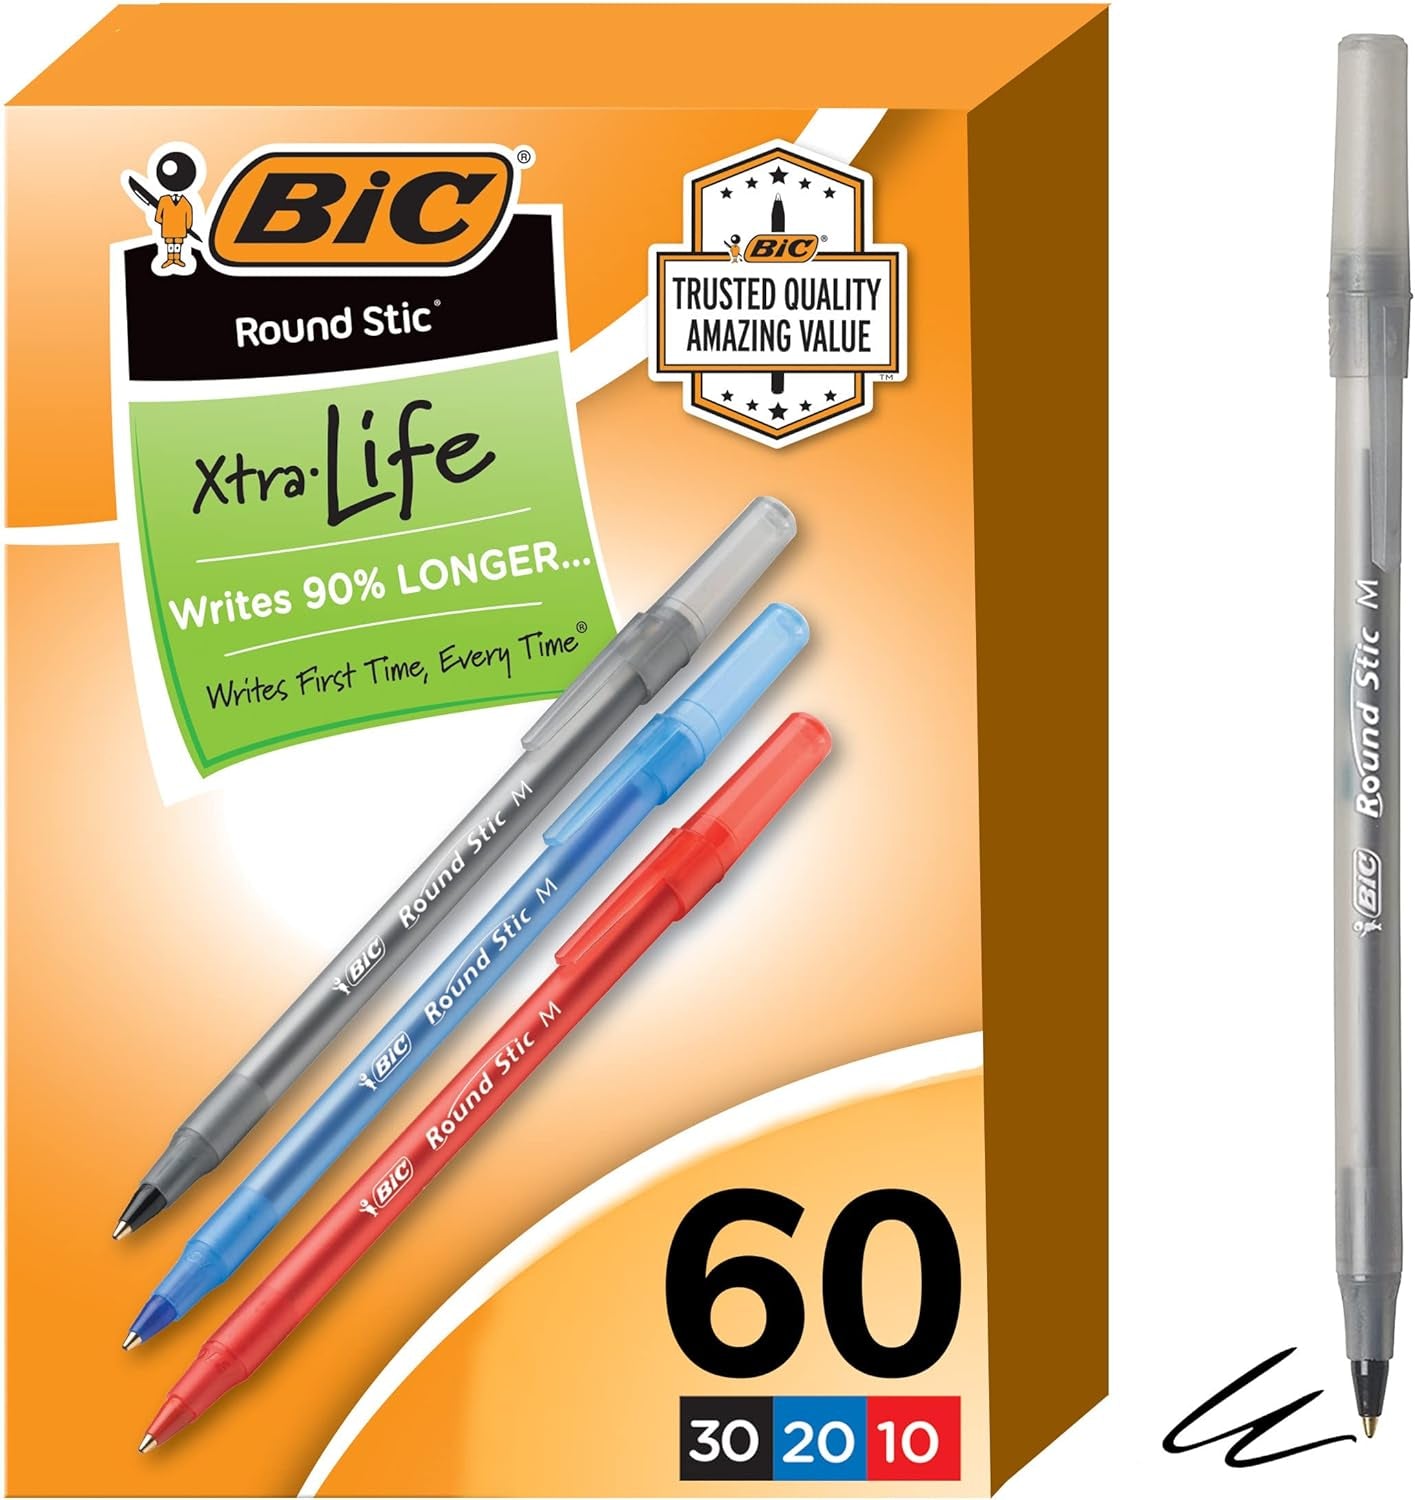 round Stic Xtra Life Assorted Ink Ballpoint Pens, Medium Point (1.0Mm), 60-Count Pack of Bulk Pens, Flexible round Barrel for Comfortable Writing, No. 1 Selling Ballpoint Pens